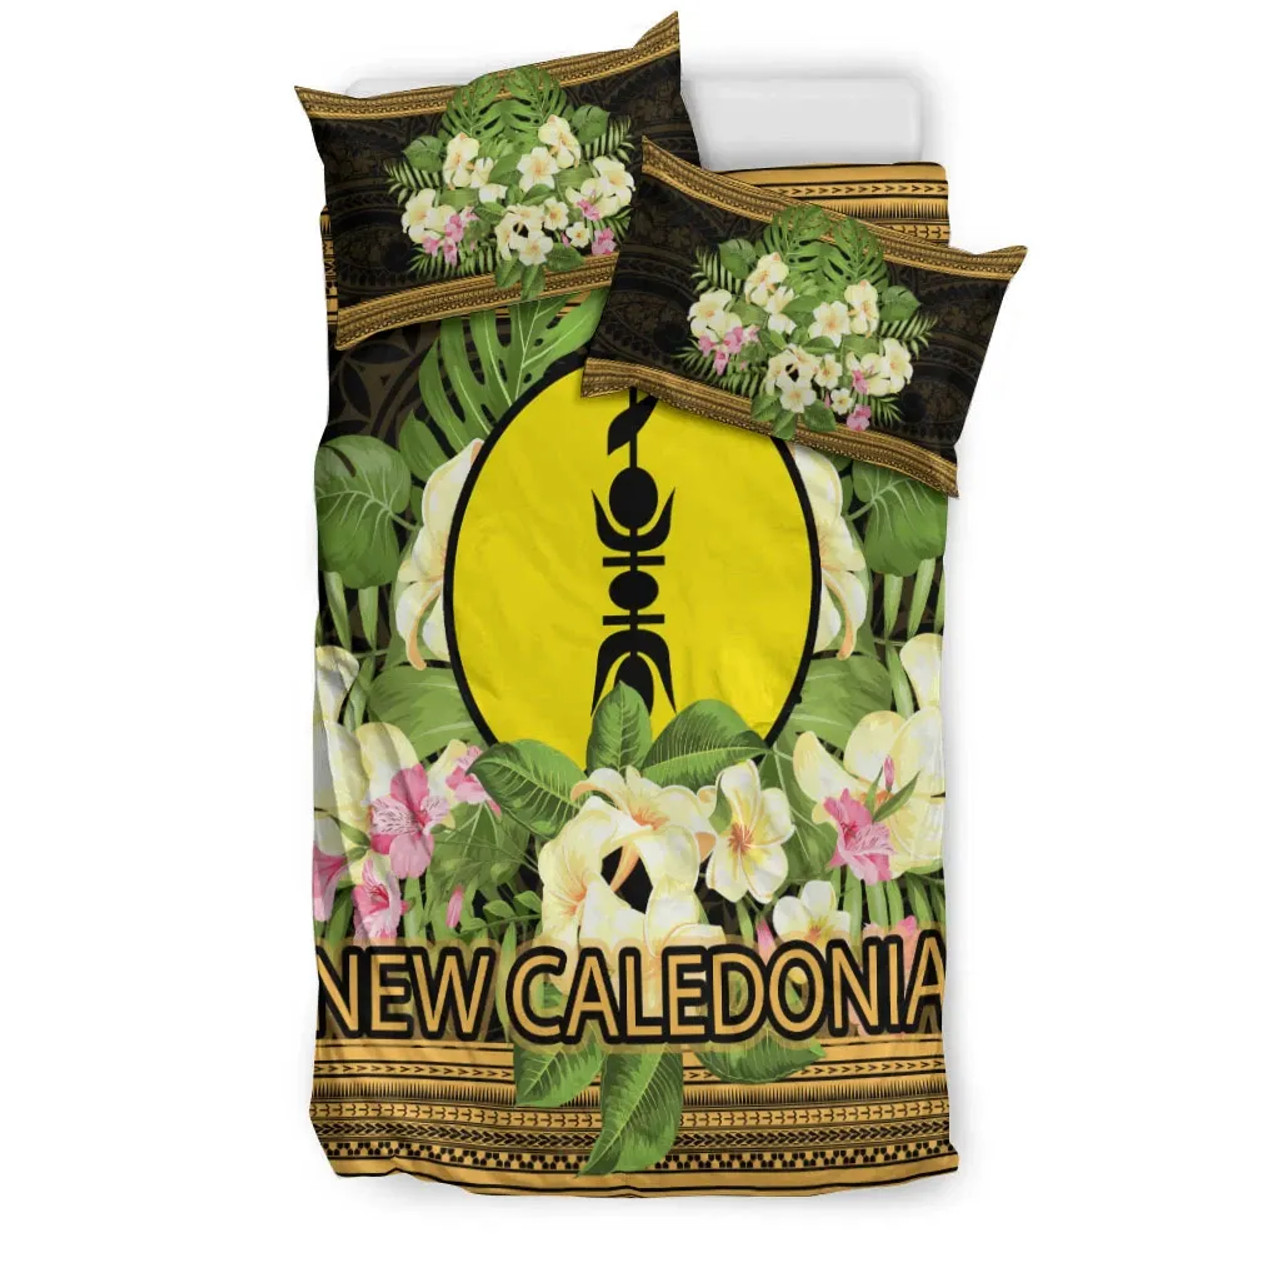 New Caledonia Bedding Set - Polynesian Gold Patterns Collection 2